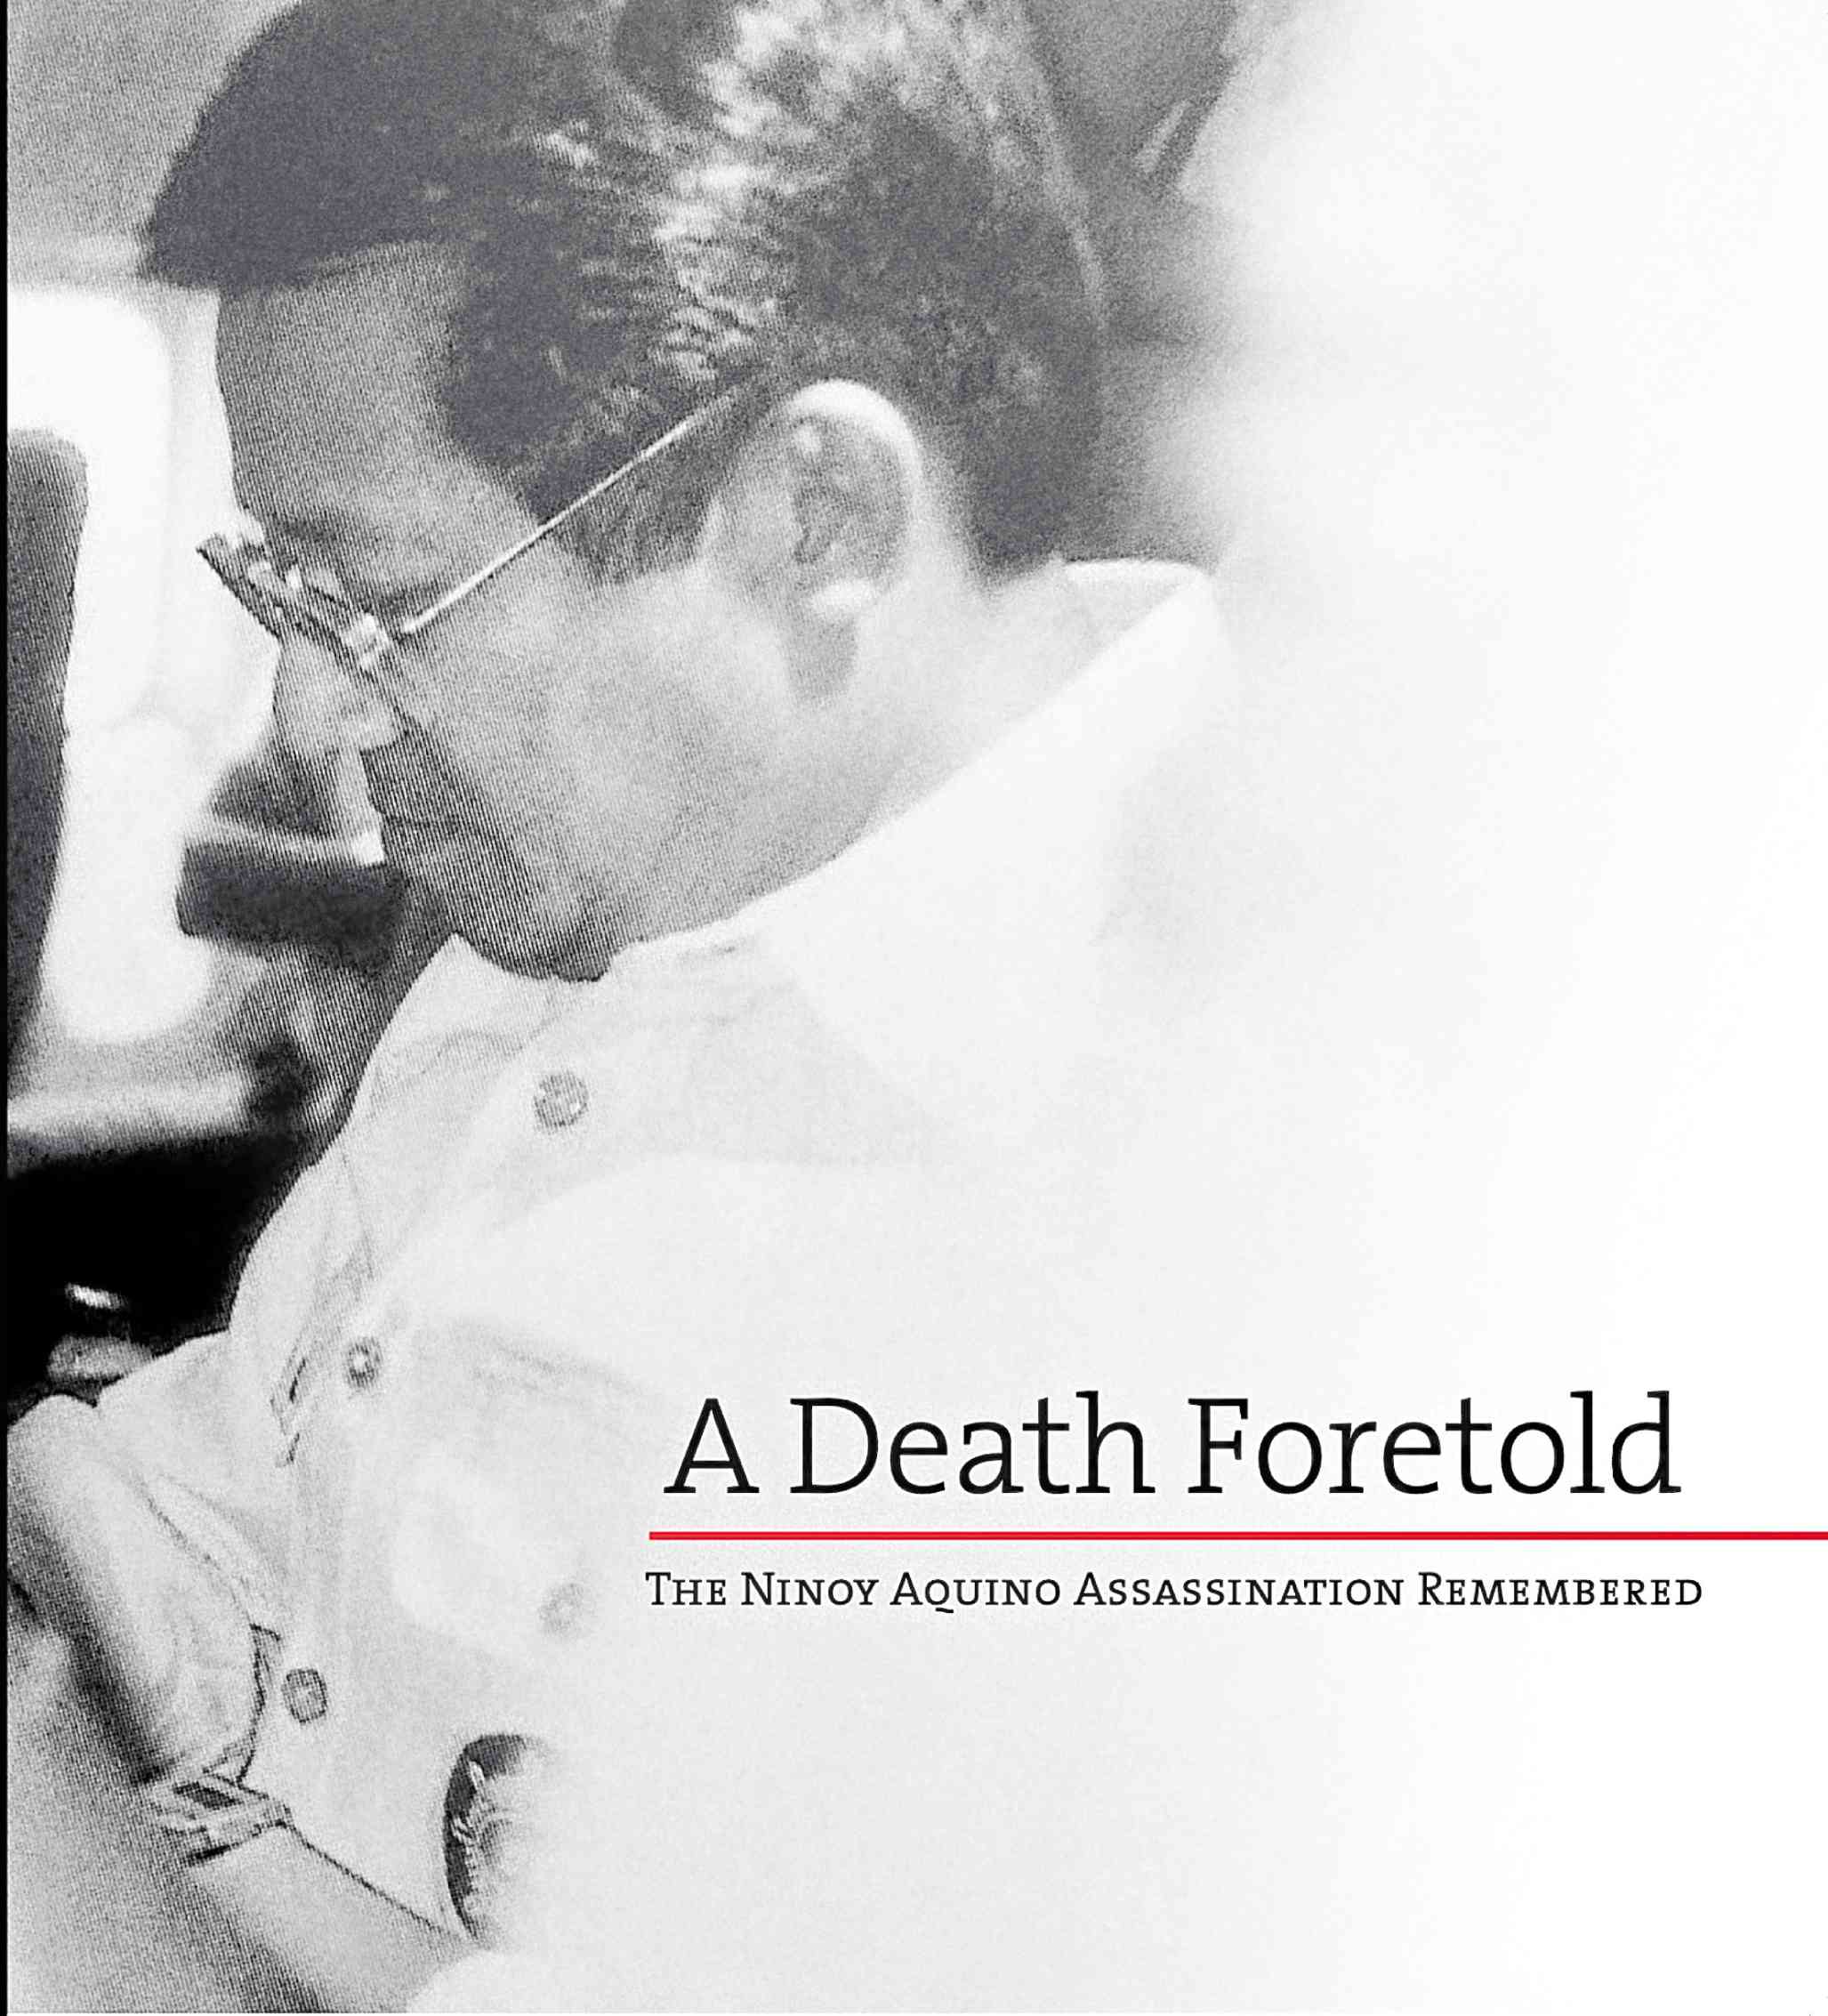 Why Ninoy Aquino’s story is worth repeating, worth remembering